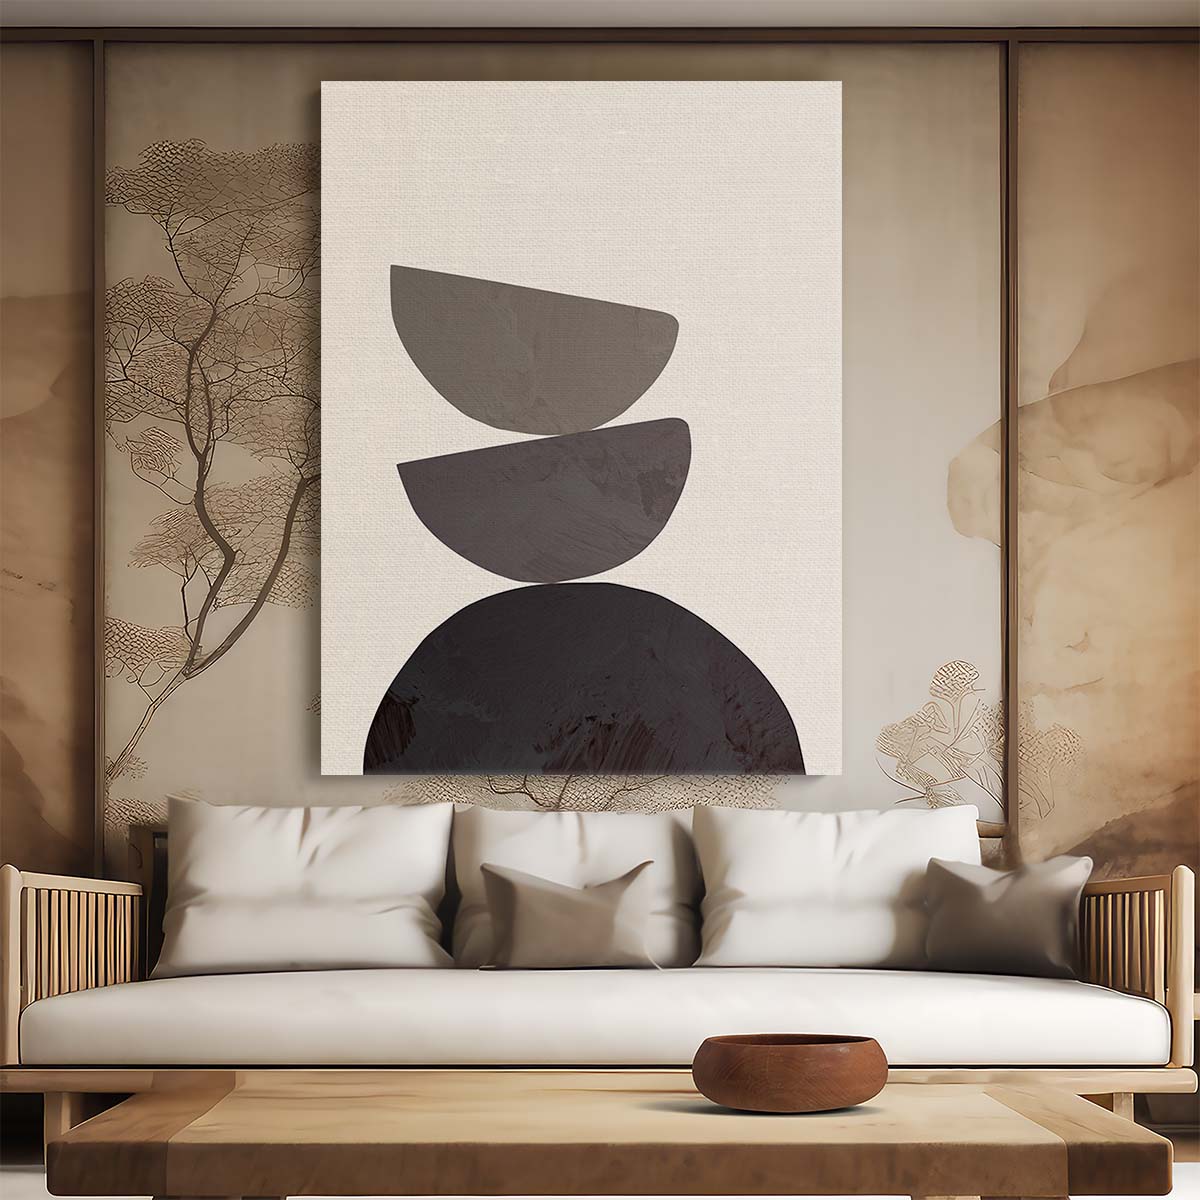 Mid-Century Geometric Abstract Illustration - Collage 08 Graphic Shapes Balance by Luxuriance Designs, made in USA